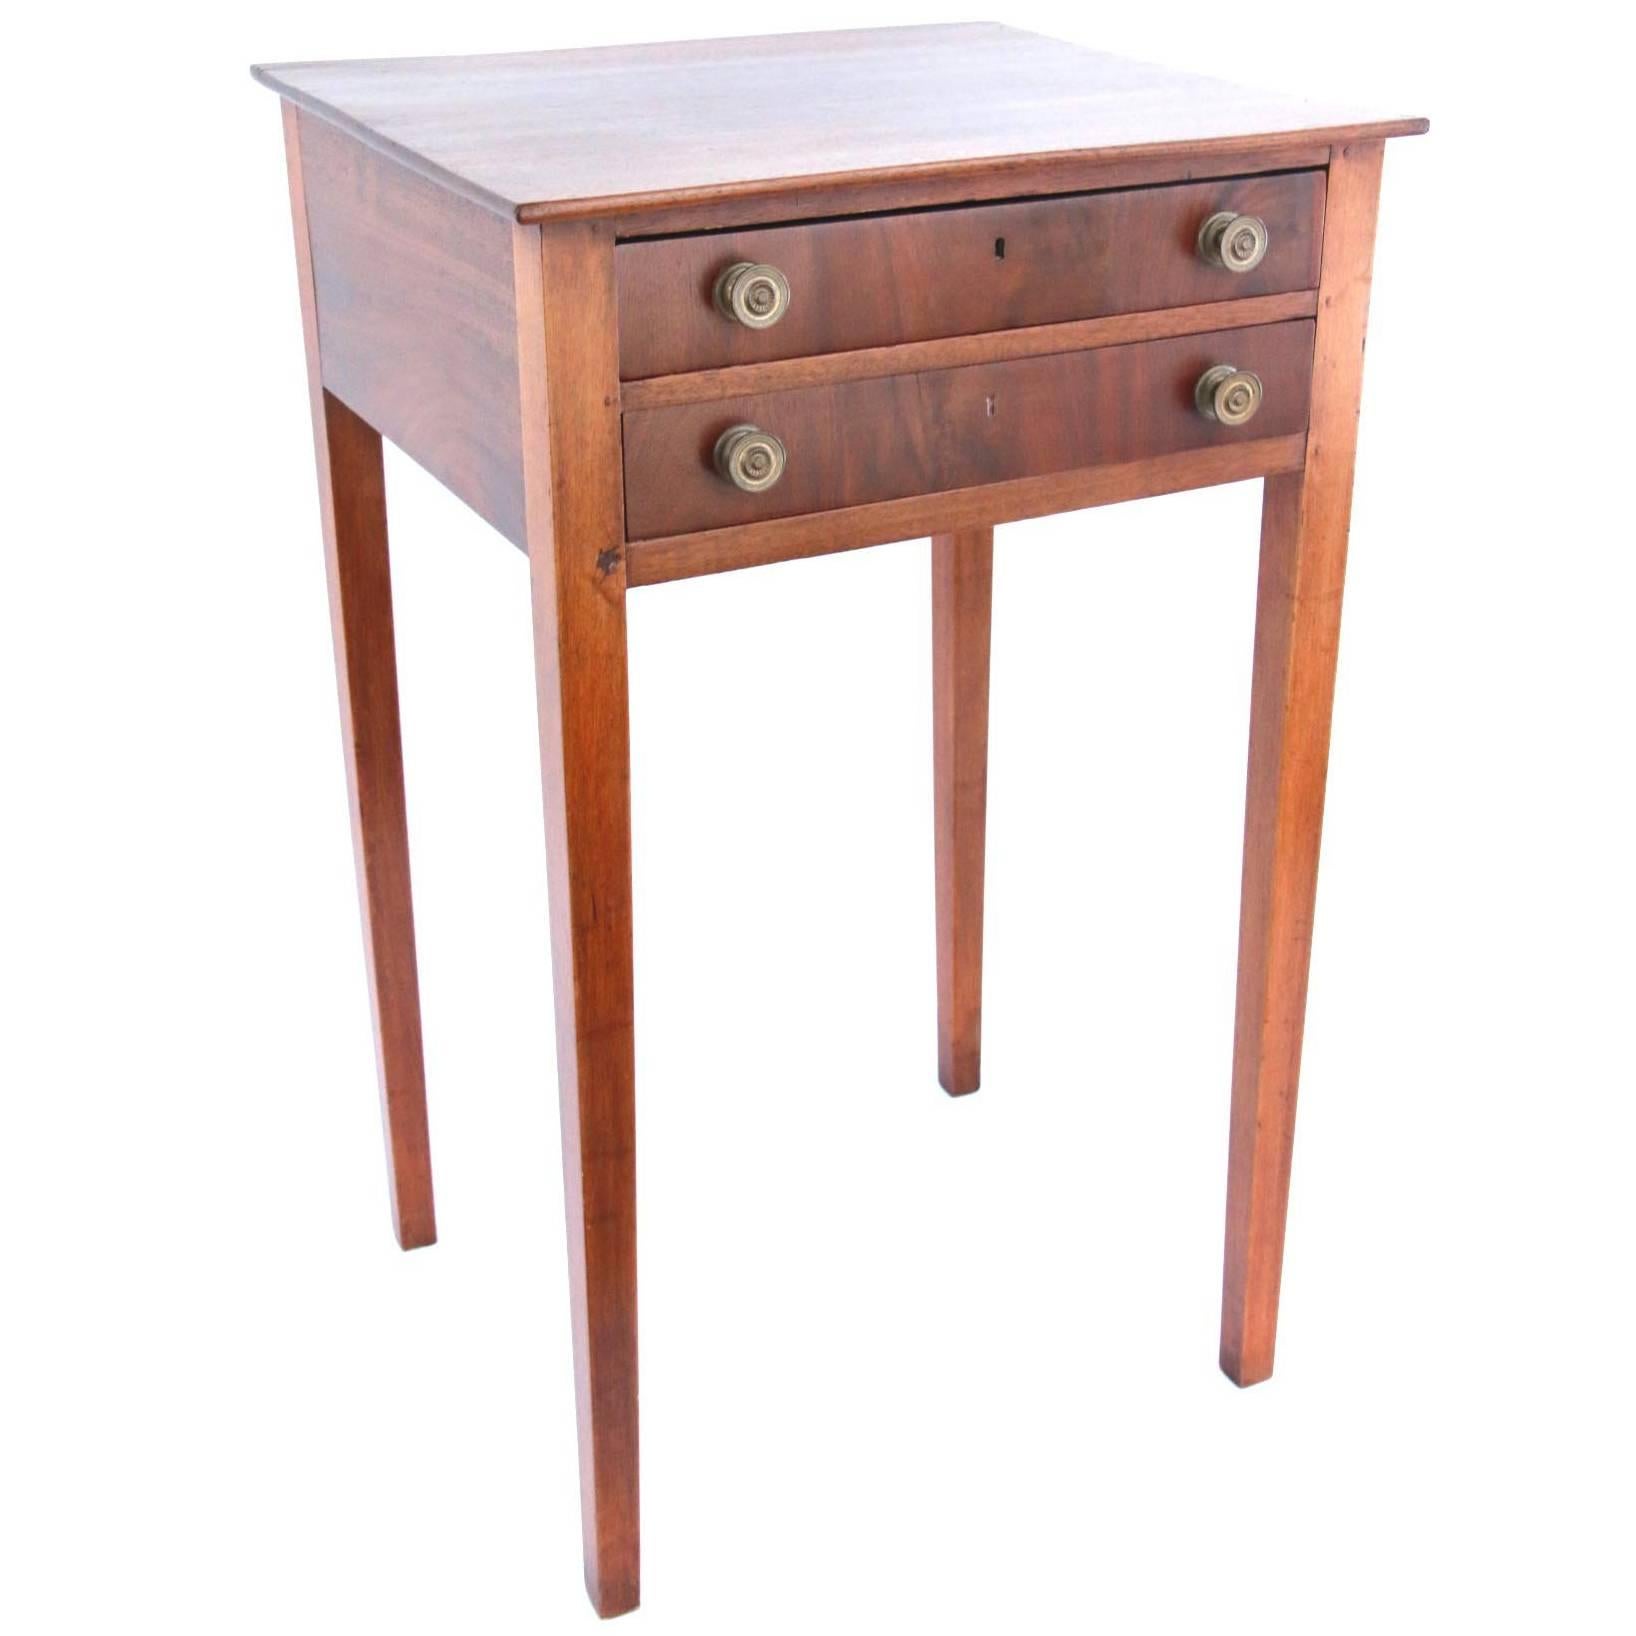 Early 19th Century New England Nepplewhite Two-Drawer Side Table